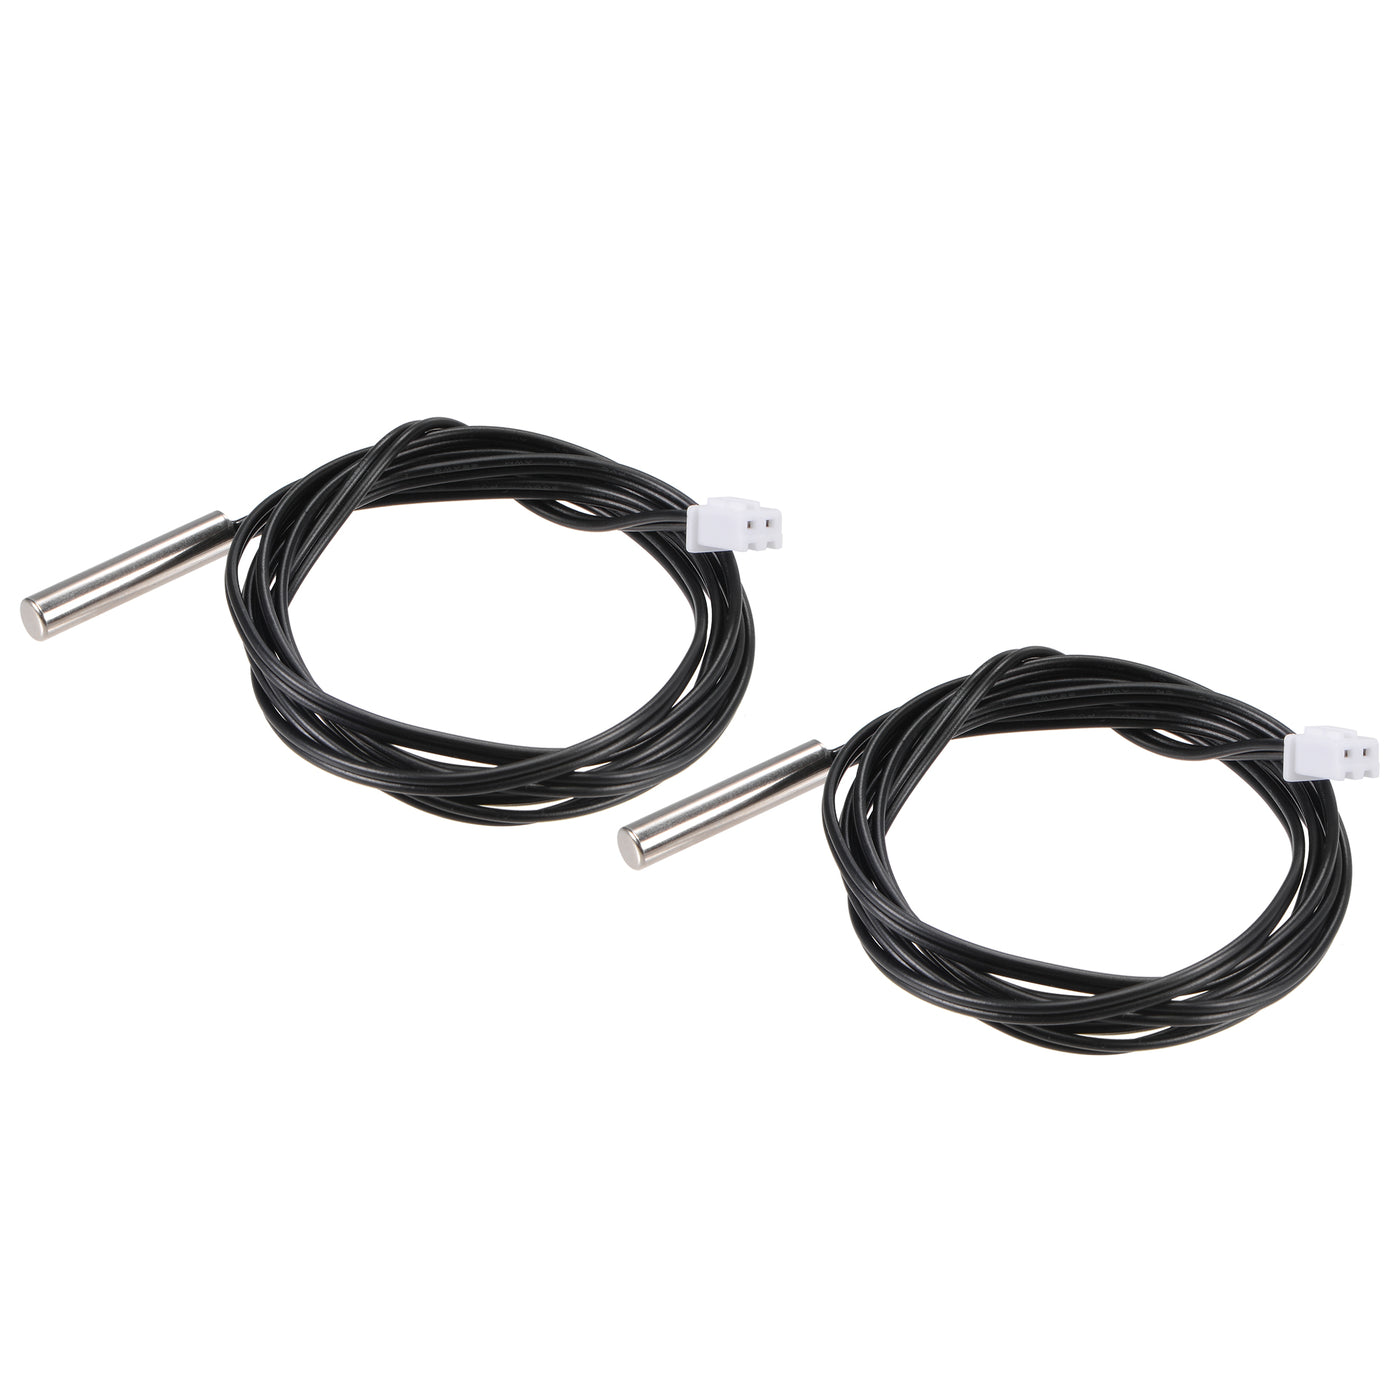 uxcell Uxcell 2pcs 5K Temperature Sensor Probe, Stainless Steel NTC Thermal Sensor Probe 3.3ft Digital Thermometer Extension Cable